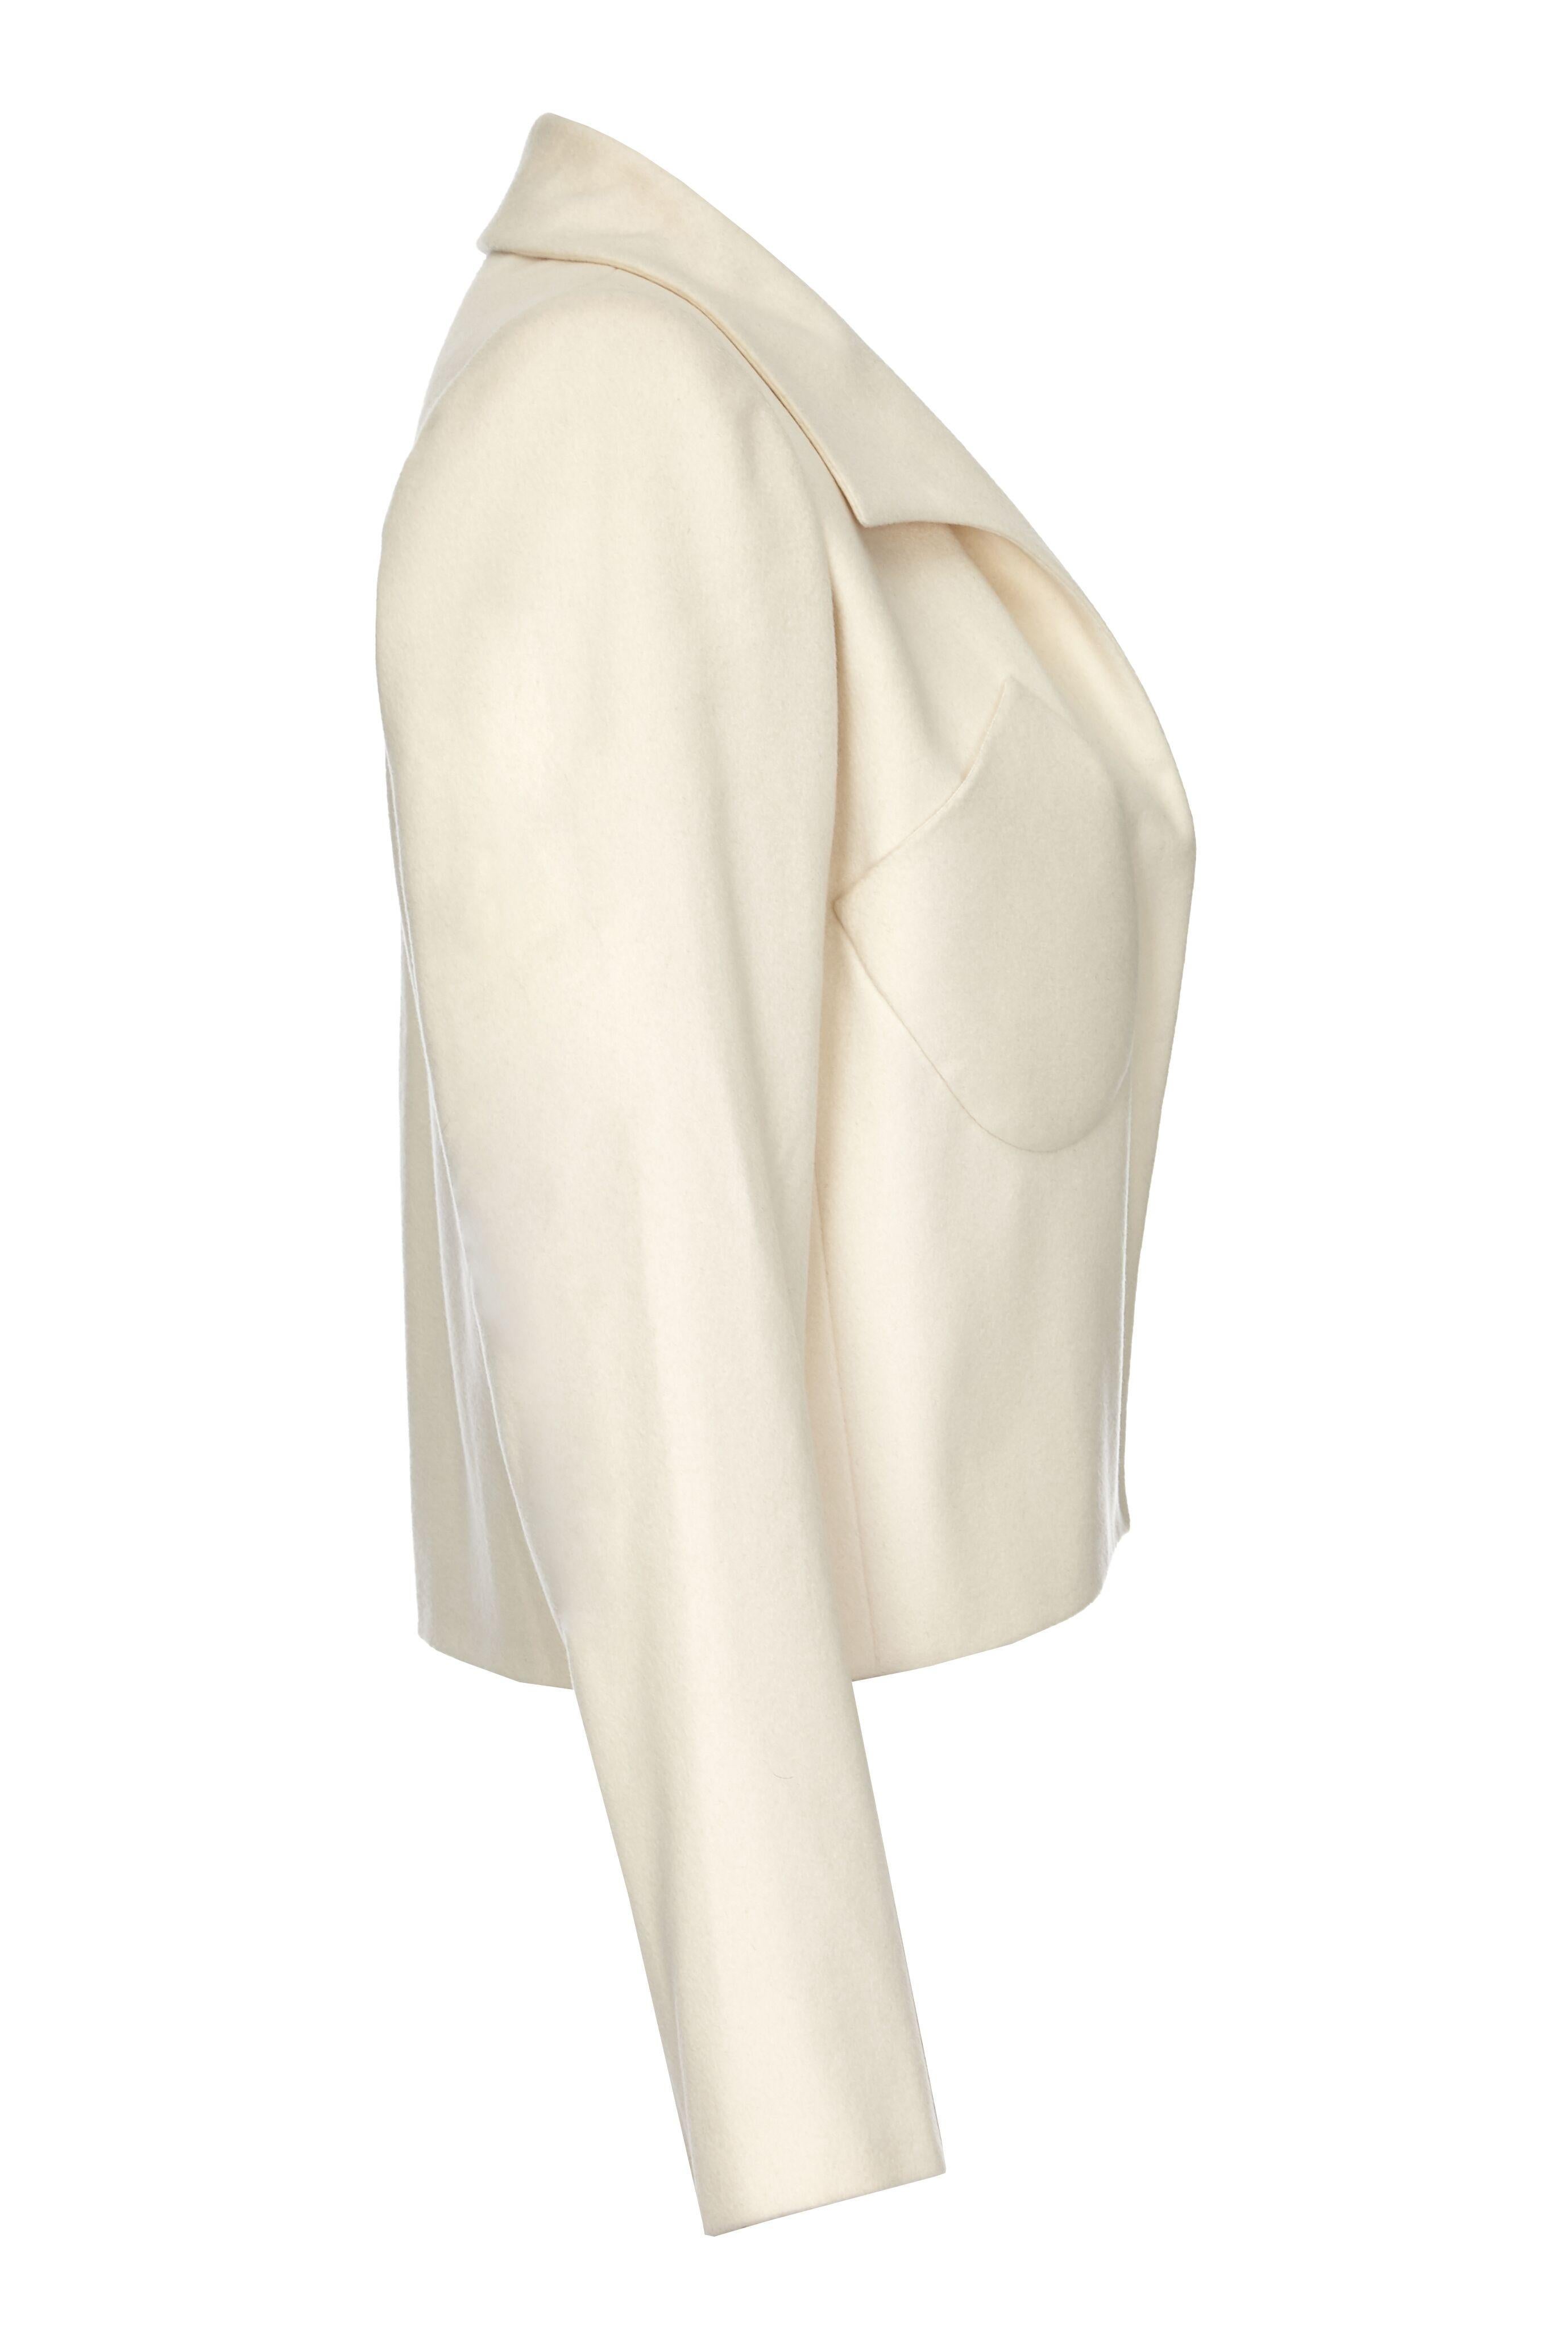 Tom Ford For Yves Saint Laurent Ivory Cashmere Structured Jacket Circa 1999 (Beige)